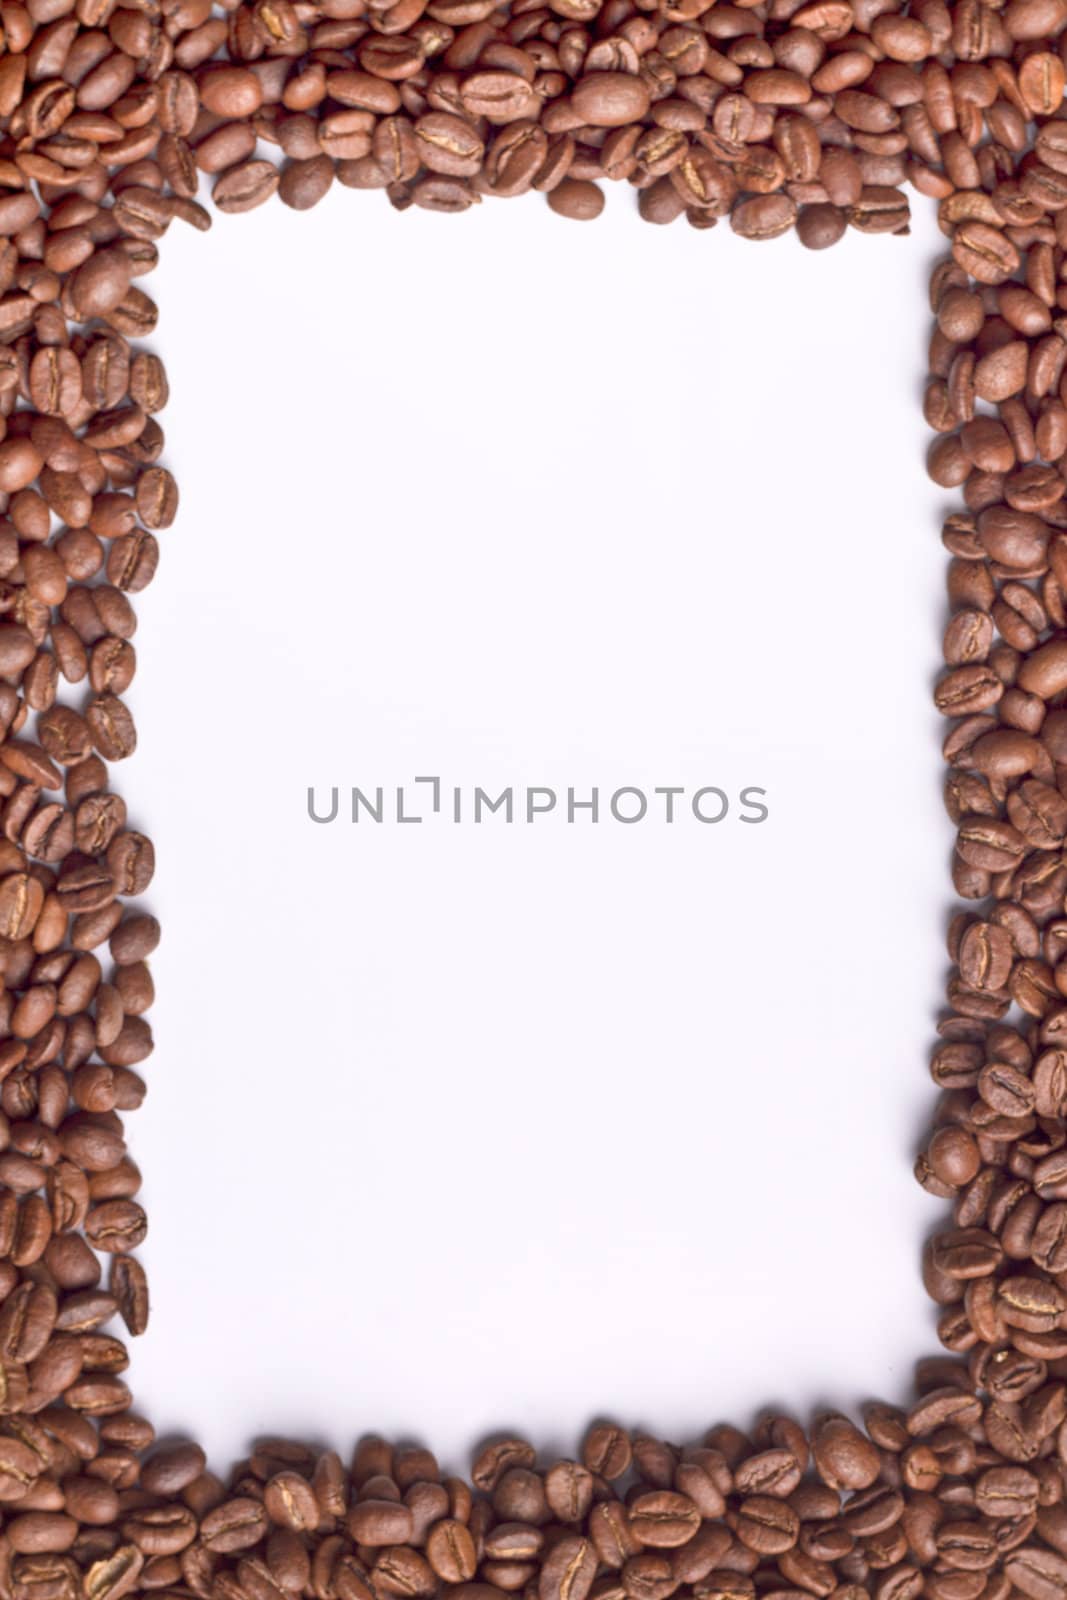 Frame with white inner area made of coffee beans